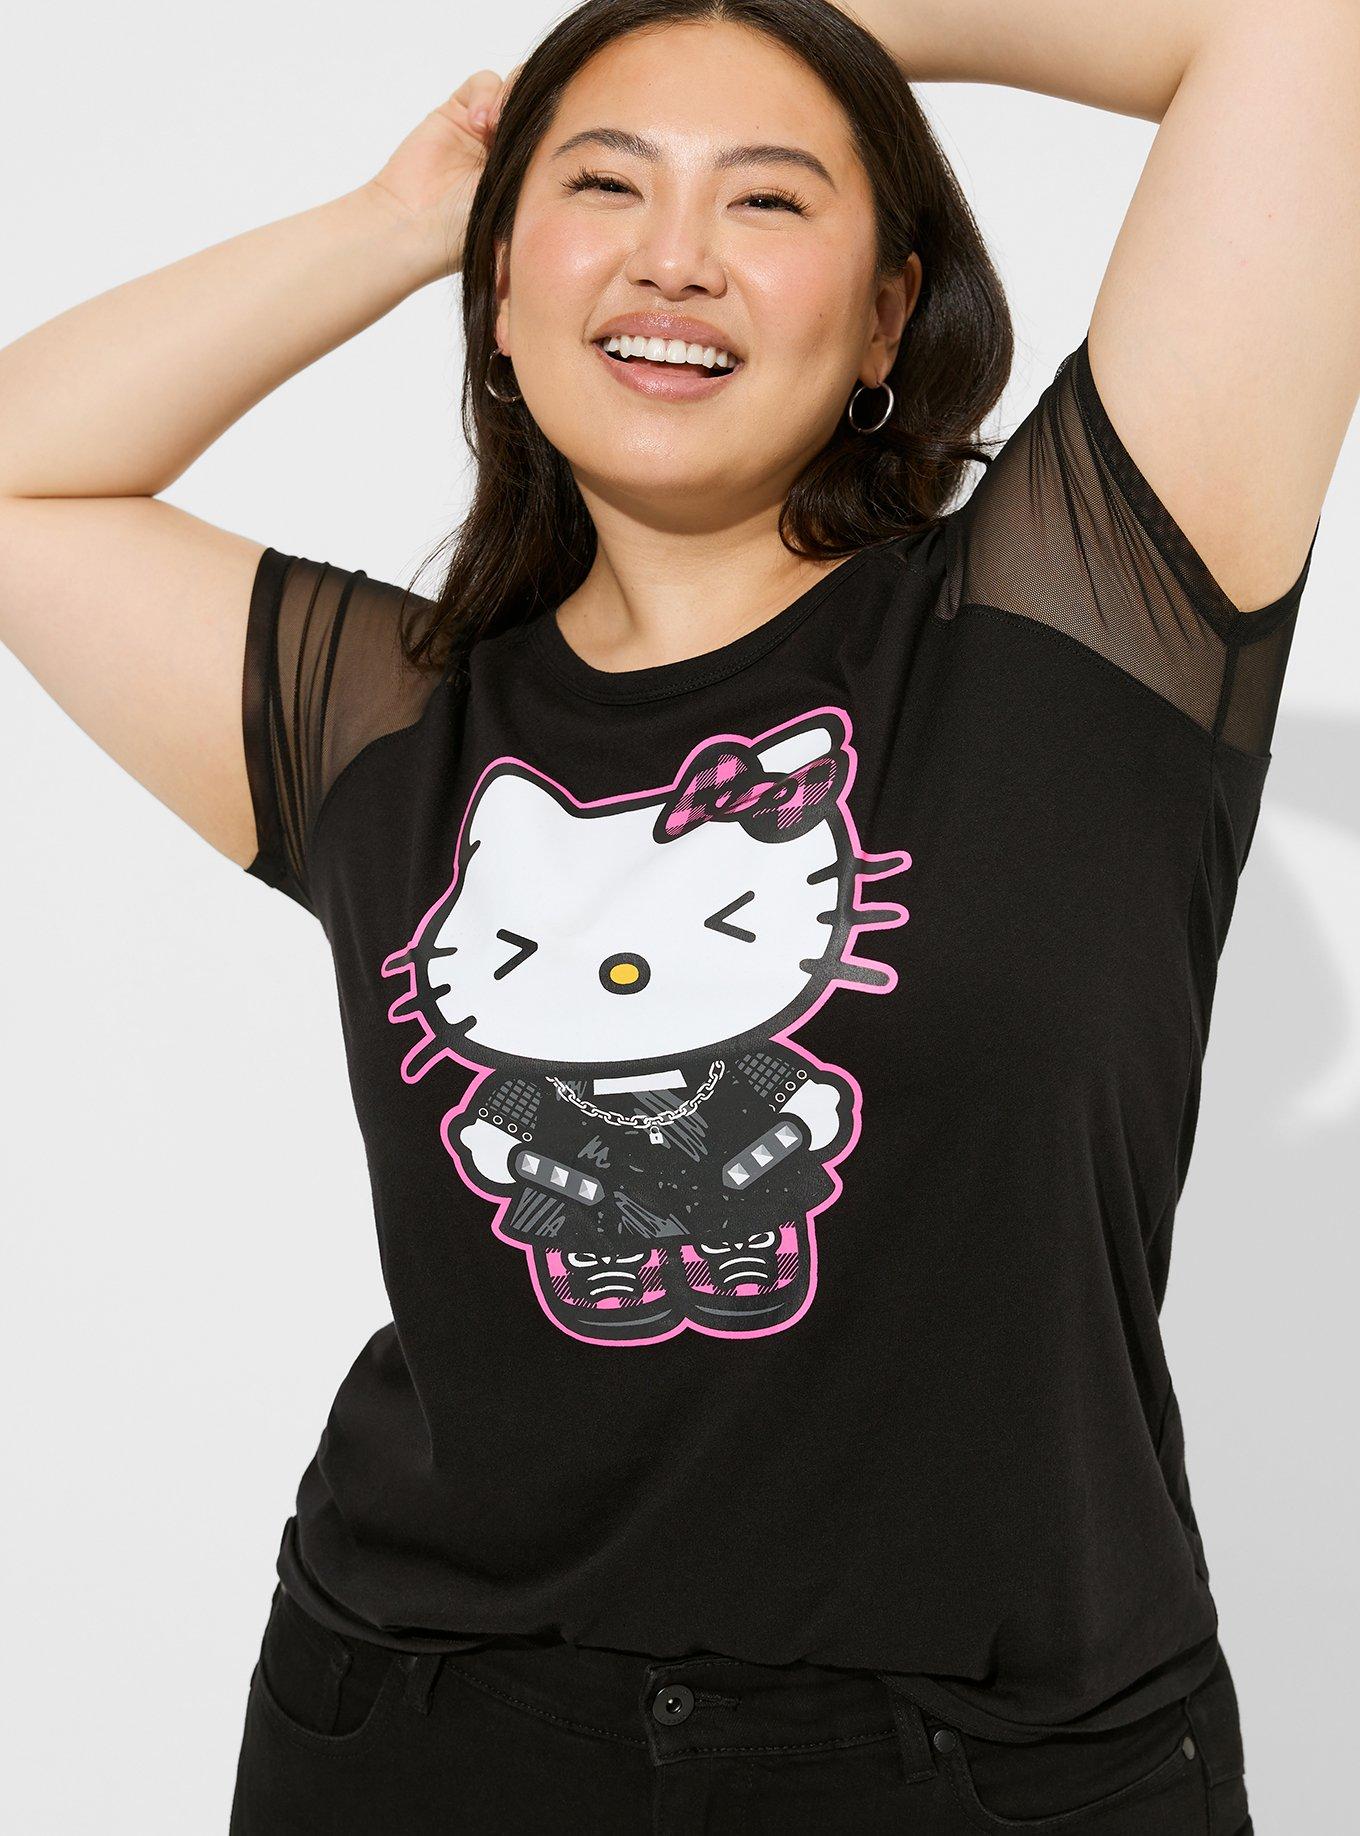 Bye Kitty! Hello Kitty Store Closing Forever At Universal Studios Florida